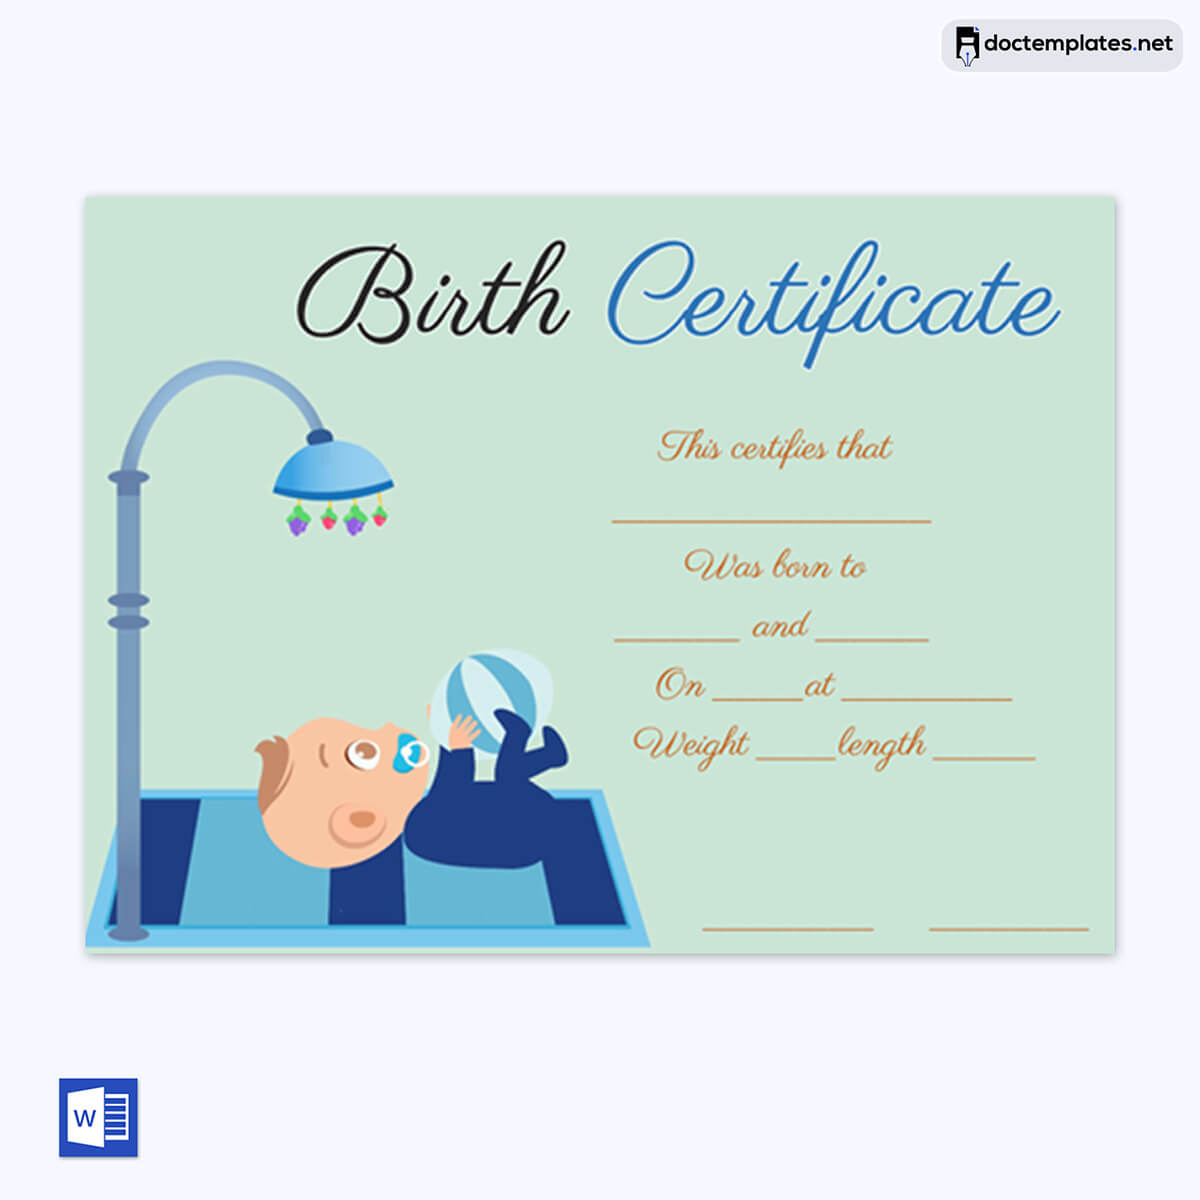 Image of Fillable birth certificate template
Fillable birth certificate template
05